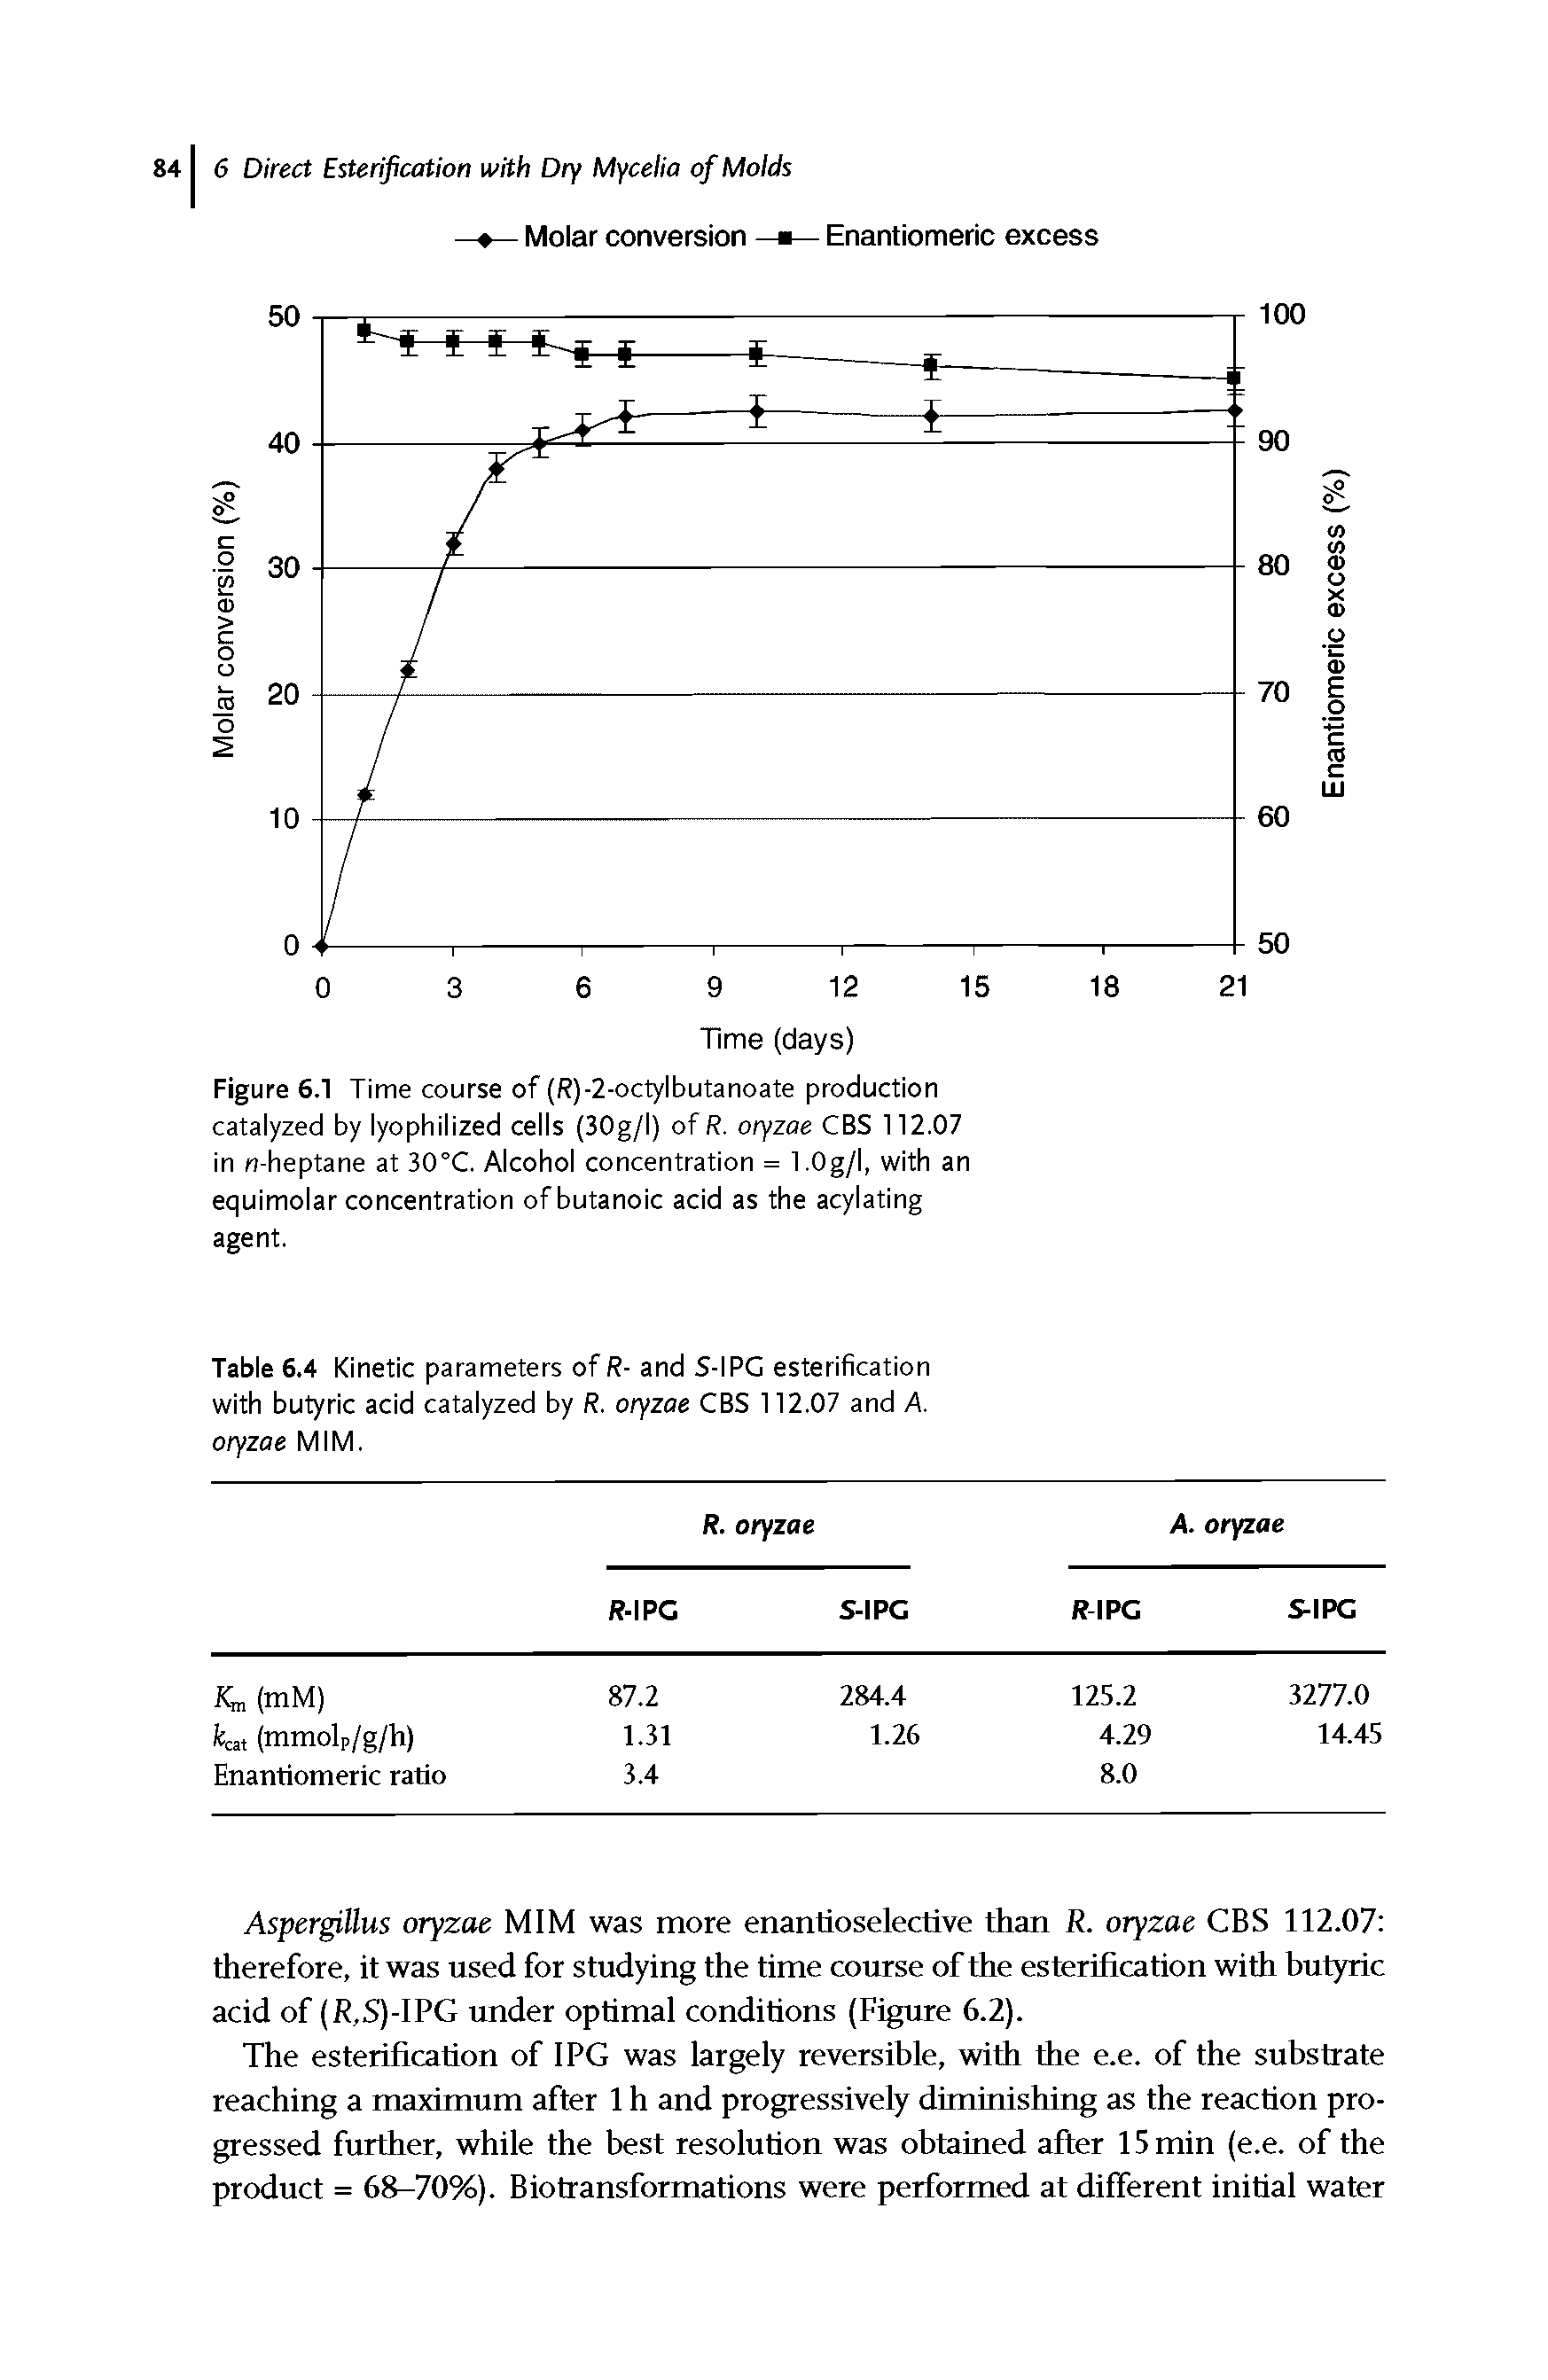 Table 6.4 Kinetic parameters of R- and S-IPG esterification with butyric acid catalyzed by R. oryzae CBS 112.07 and A. oryzae MIM.